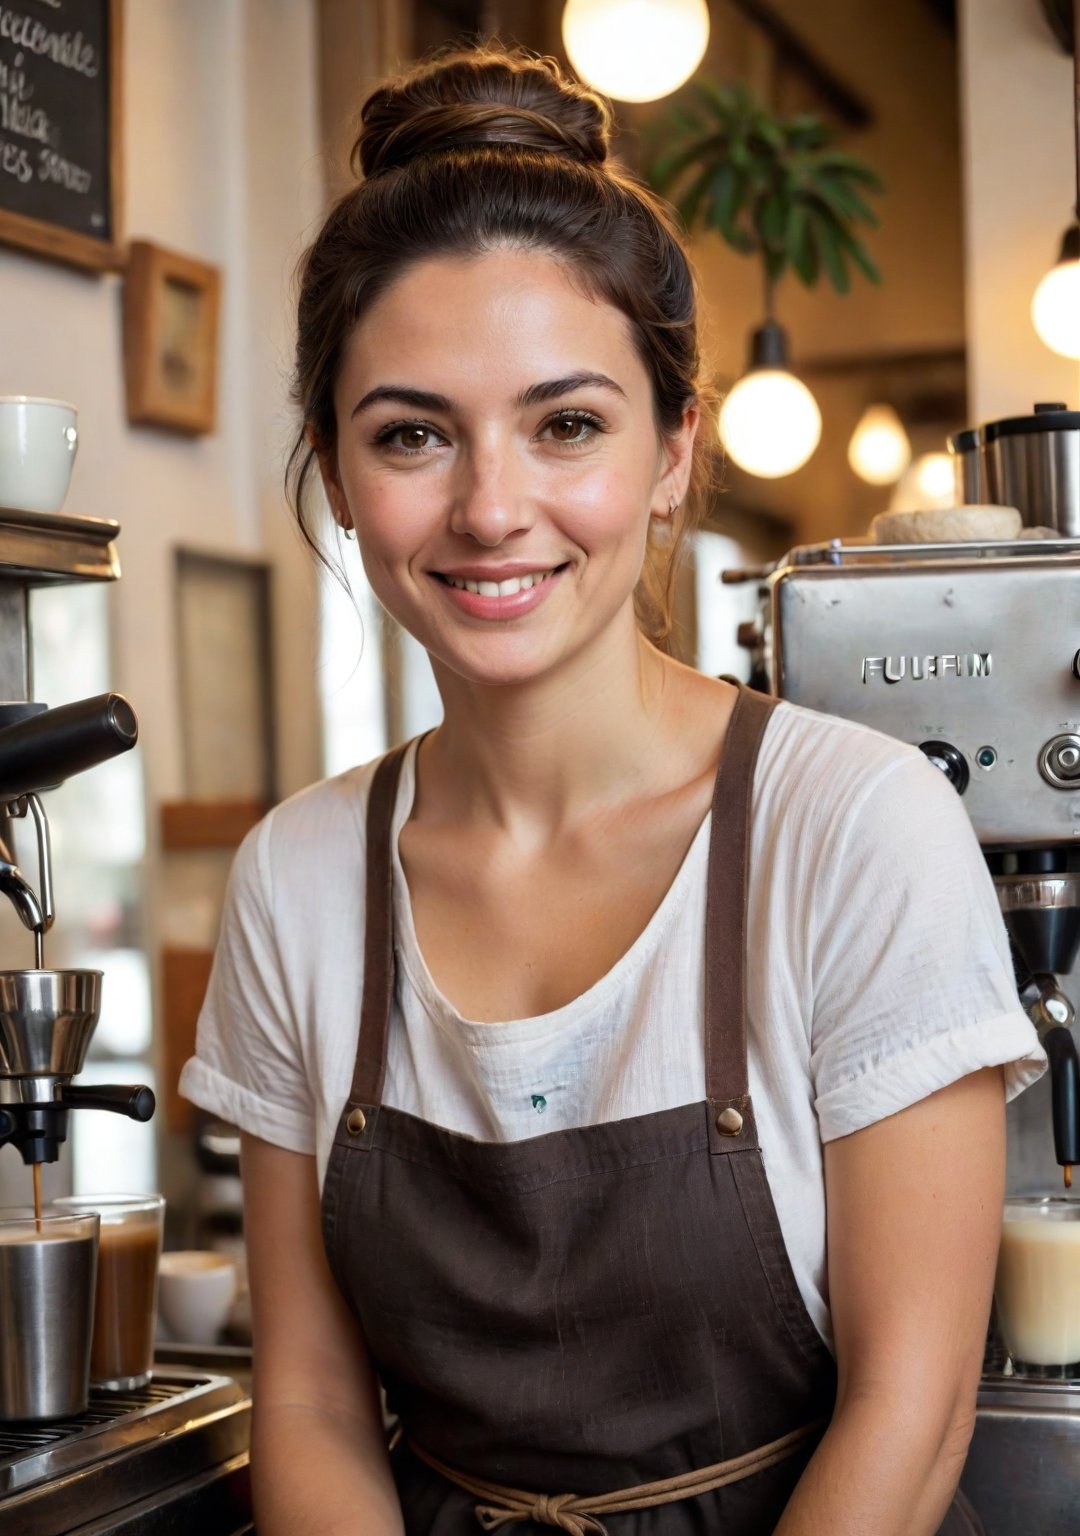 Coffee shop view of a Greek barista, 31 years old, combining artisanal coffee skills with a laid-back Mediterranean charm, with an olive-toned, expressive face that includes a pronounced underbite and a small, faded burn scar on her forehead, in a cozy Athens café. She's expertly operating an espresso machine, her movements fluid and skilled, her open smile engaging despite its dental uniqueness.

Her hair, a deep brunette with sun-kissed highlights, is styled in a loose, effortless chignon, occasionally falling into her eyes as she works. Her eyes, one marginally drooping, twinkle with warmth and hospitality, her uneven smile exuding friendliness.

She has a lean, nimble build, with slightly uneven hips that give her a distinctive sway when she moves. Wearing a (vintage-inspired apron) over a (simple, stylish tee) and (linen trousers), her attire is both practical for her job and fashionably casual. Her feet, in (well-worn leather loafers), glide across the café floor, her presence a charming mix of coffee expertise and welcoming, unassuming beauty.
(skin blemishes), 8k uhd, dslr, soft lighting, high quality, film grain, Fujifilm XT3, high quality photography, 3 point lighting, flash with softbox, 4k, Canon EOS R3, hdr, smooth, sharp focus, high resolution, award winning photo, 80mm, f2.8, bokeh, (Highest Quality, 4k, masterpiece, Amazing Details:1.1), film grain, Fujifilm XT3, photography,
(imperfect skin), detailed eyes, epic, dramatic, fantastical, full body, intricate design and details, dramatic lighting, hyperrealism, photorealistic, cinematic, 8k, detailed face. Extremely Realistic, art by sargent, PORTRAIT PHOTO, Aligned eyes, Iridescent Eyes, (blush, eye_wrinkles:0.6), (goosebumps:0.5), subsurface scattering, ((skin pores)), (detailed skin texture), (( textured skin)), realistic dull (skin noise), visible skin detail, skin fuzz, dry skin, hyperdetailed face, sharp picture, sharp detailed, (((analog grainy photo vintage))), Rembrandt lighting, ultra focus, illuminated face, detailed face, 8k resolution
,photo r3al,Extremely Realistic,aw0k euphoric style,PORTRAIT PHOTO,Enhanced Reality